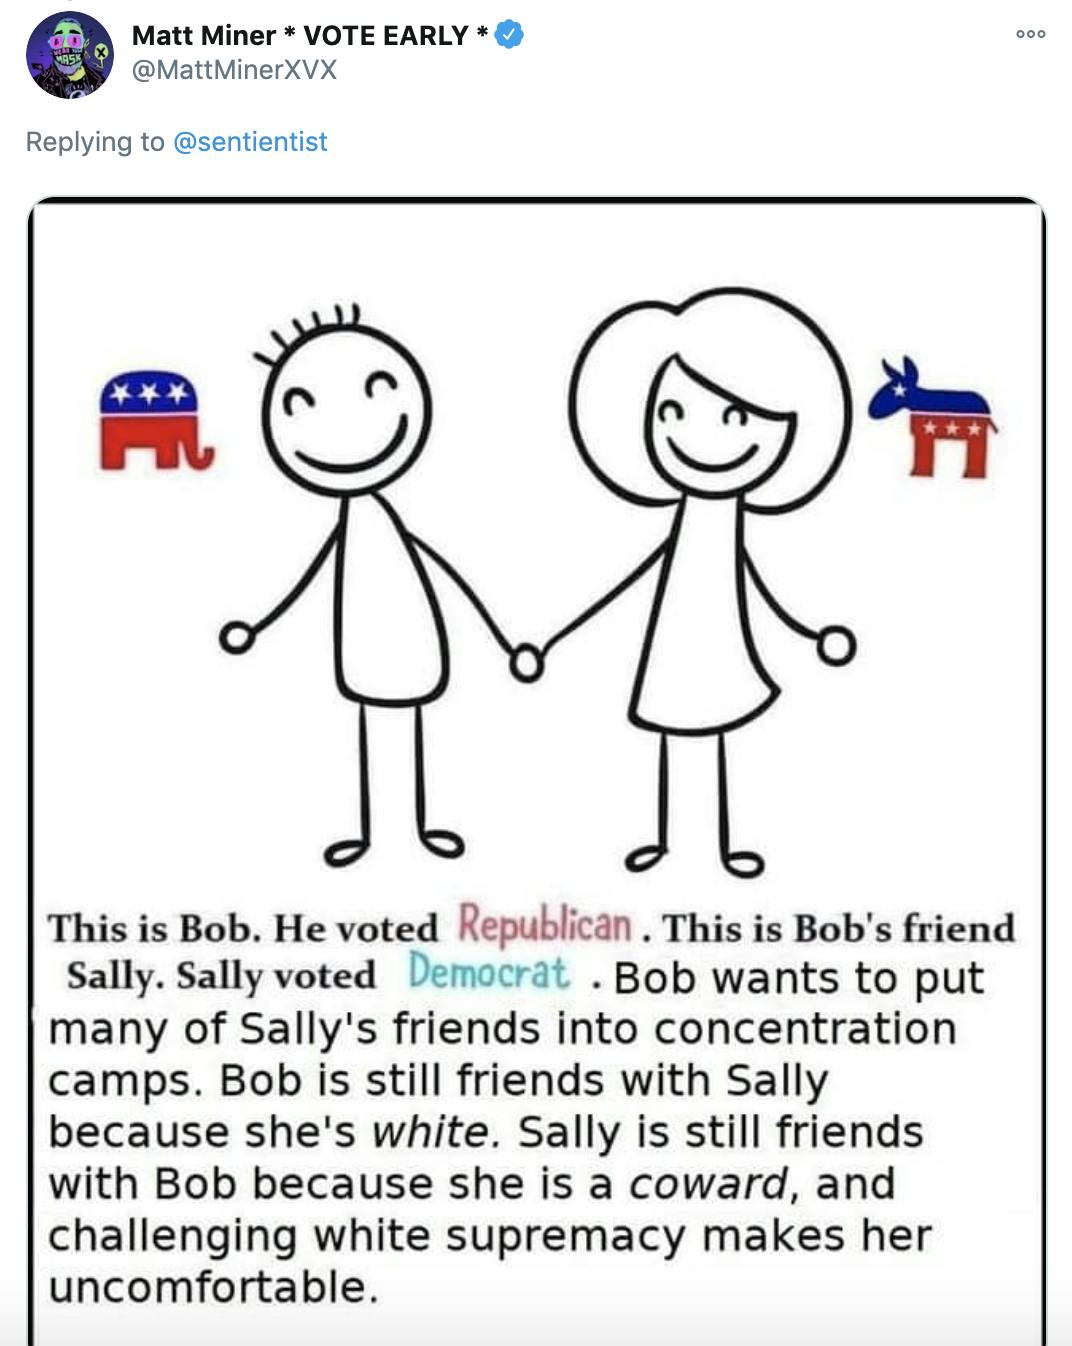 Male and female stick figures with the republican elephant and democratic donkey beside them and text saying 'This is Bob. He voted Republican. This is Bob's friend Sally. Sally voted Democrat. Bob wants to put many of Sally's friends in concentration camps. Bob is still friends with Sally because she's white. Sally is still friends with Bob because she is a coward and challenging white supremacy makes her uncomfortable.